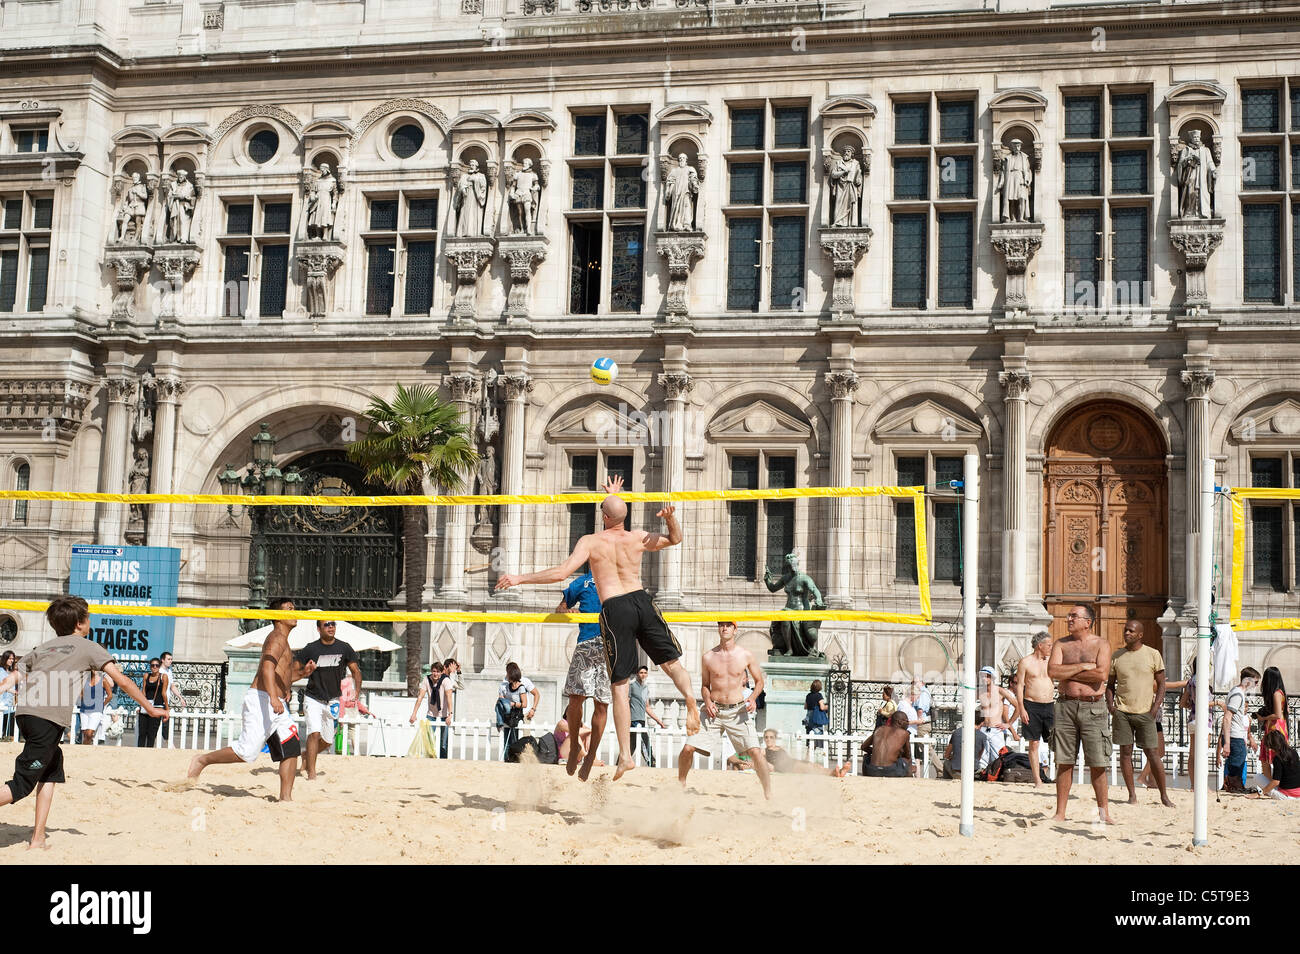 People playing beach volleyball on an artificial field in  front of City Hall during the Paris Plage event, Paris, France. Stock Photo